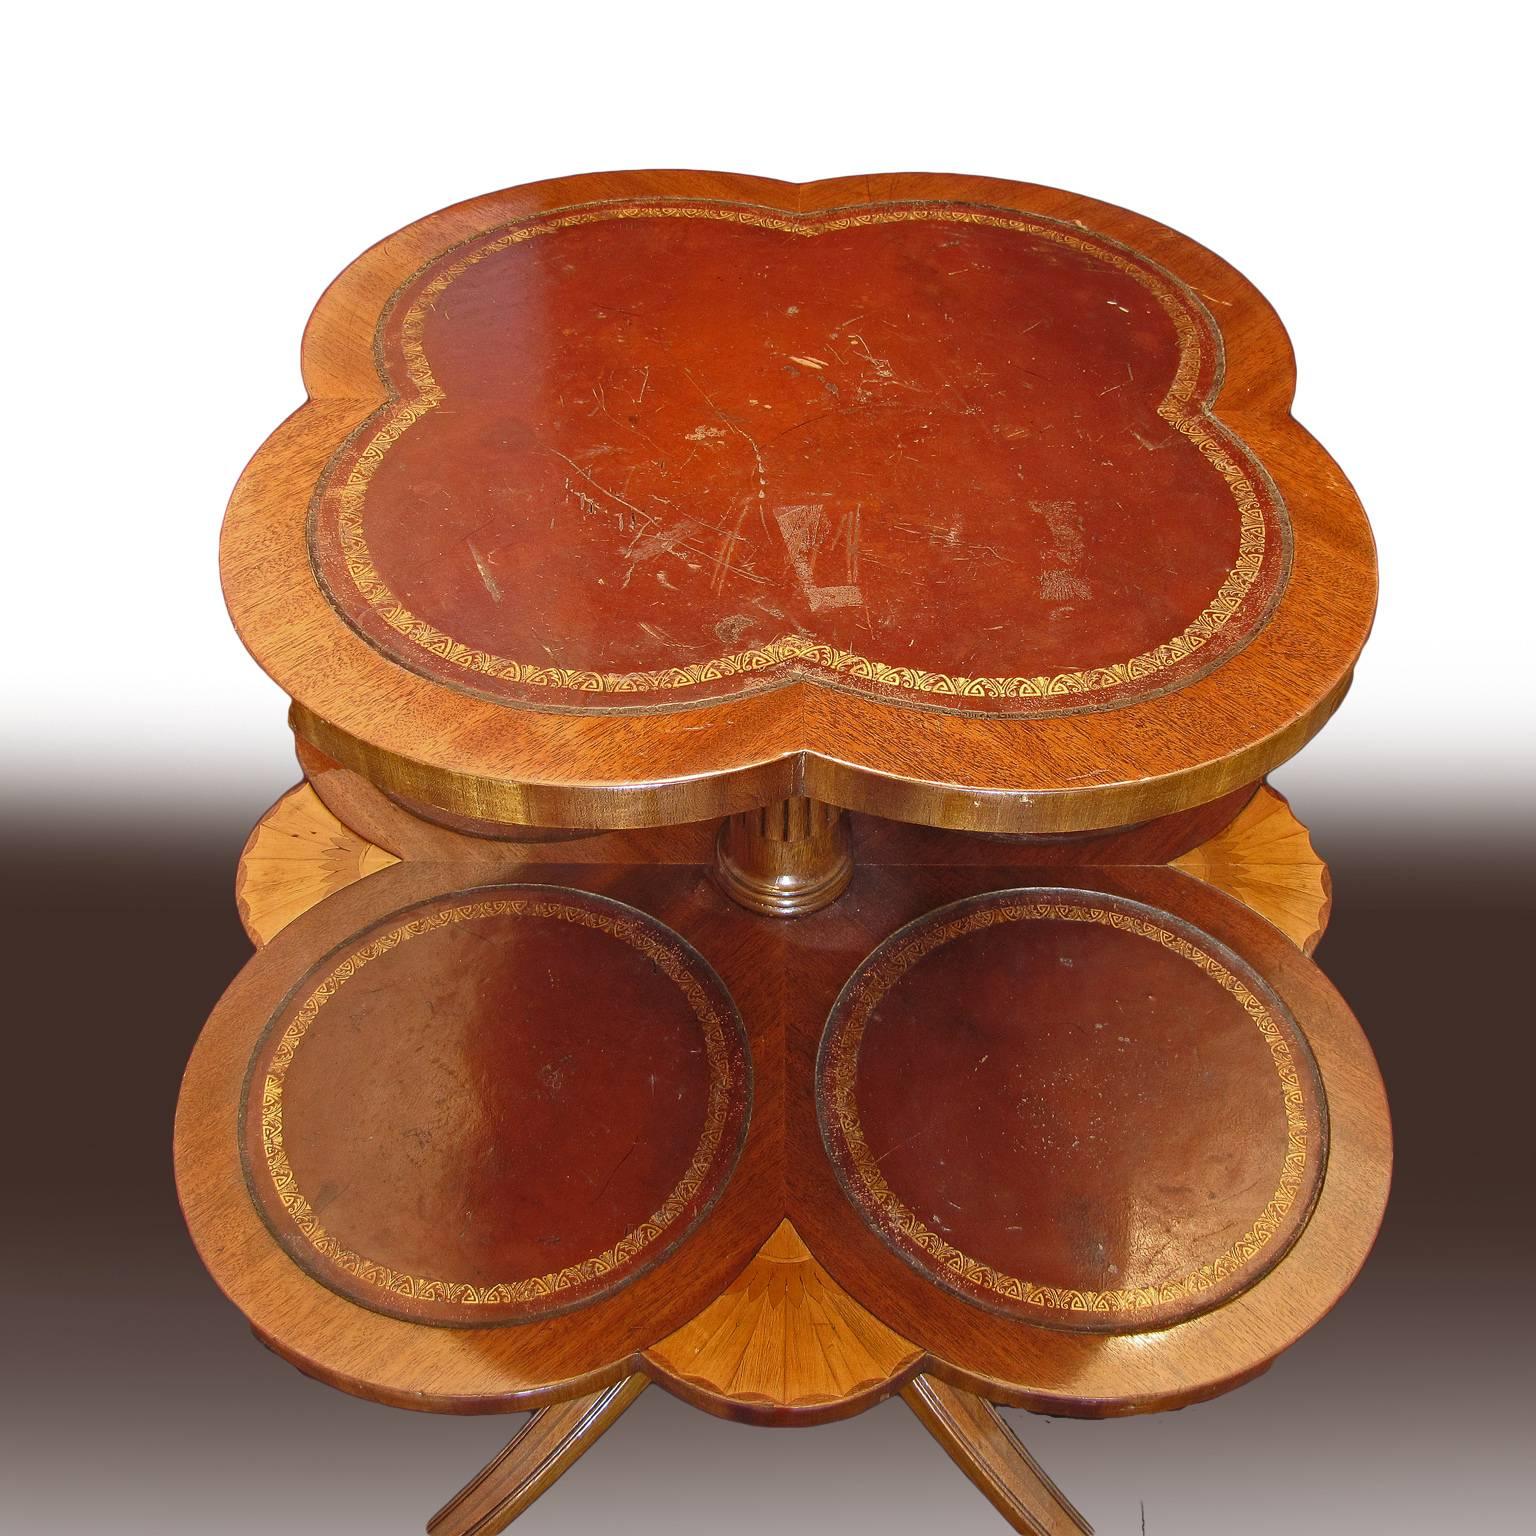 Victorian 19th Century Two-Tier Side Tables with Saber Legs by J.B. Van Sciver Co. For Sale